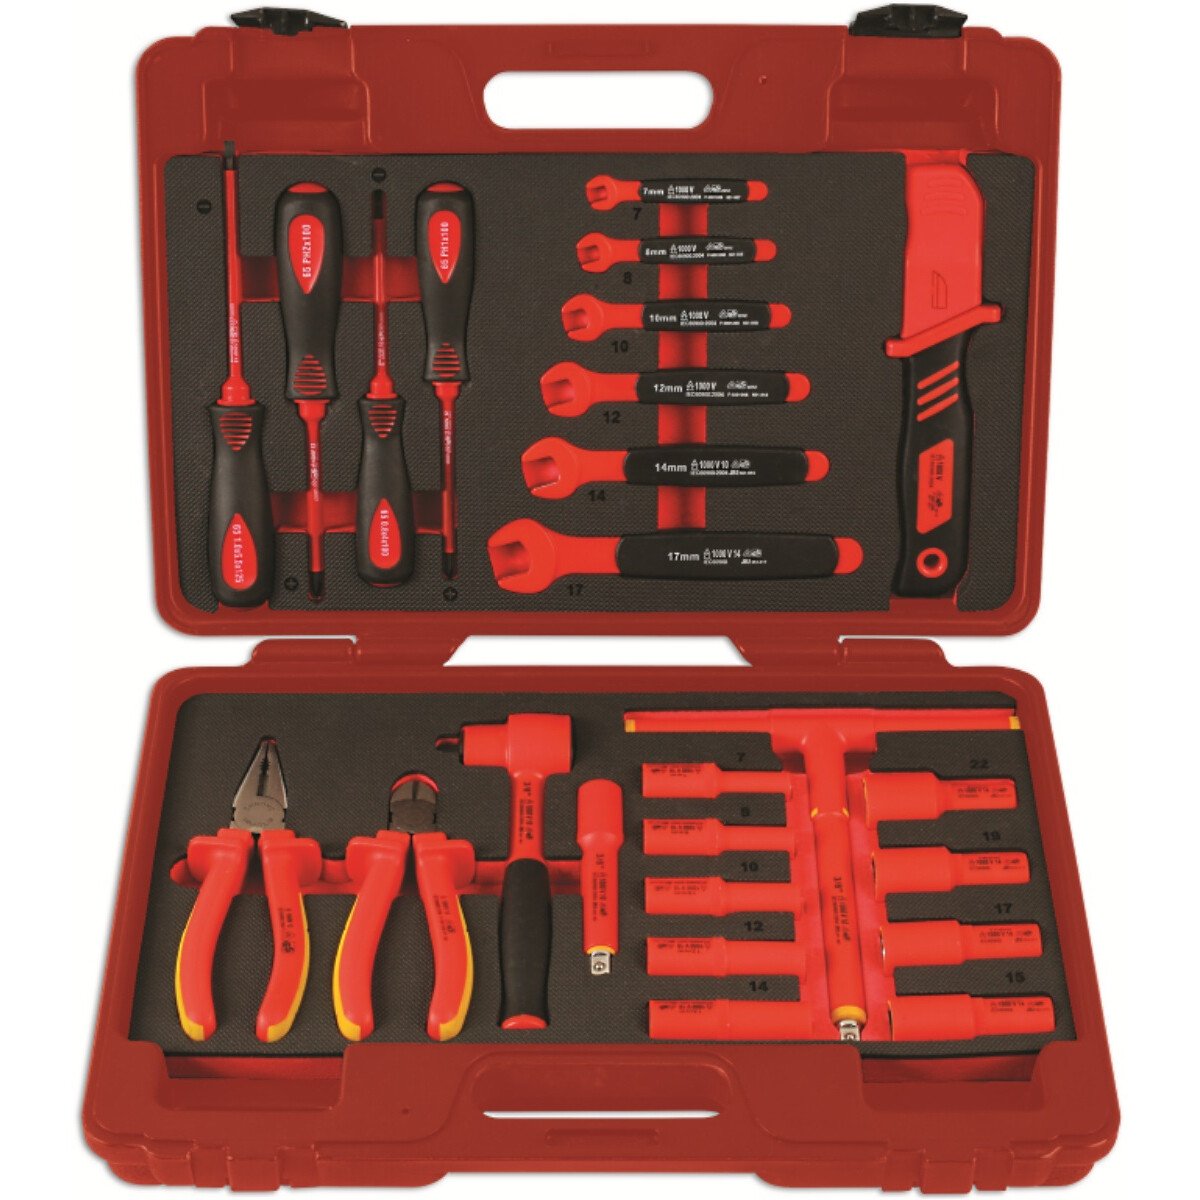 Laser 6150 Insulated Tool Kit 3/8" Drive 25 Piece